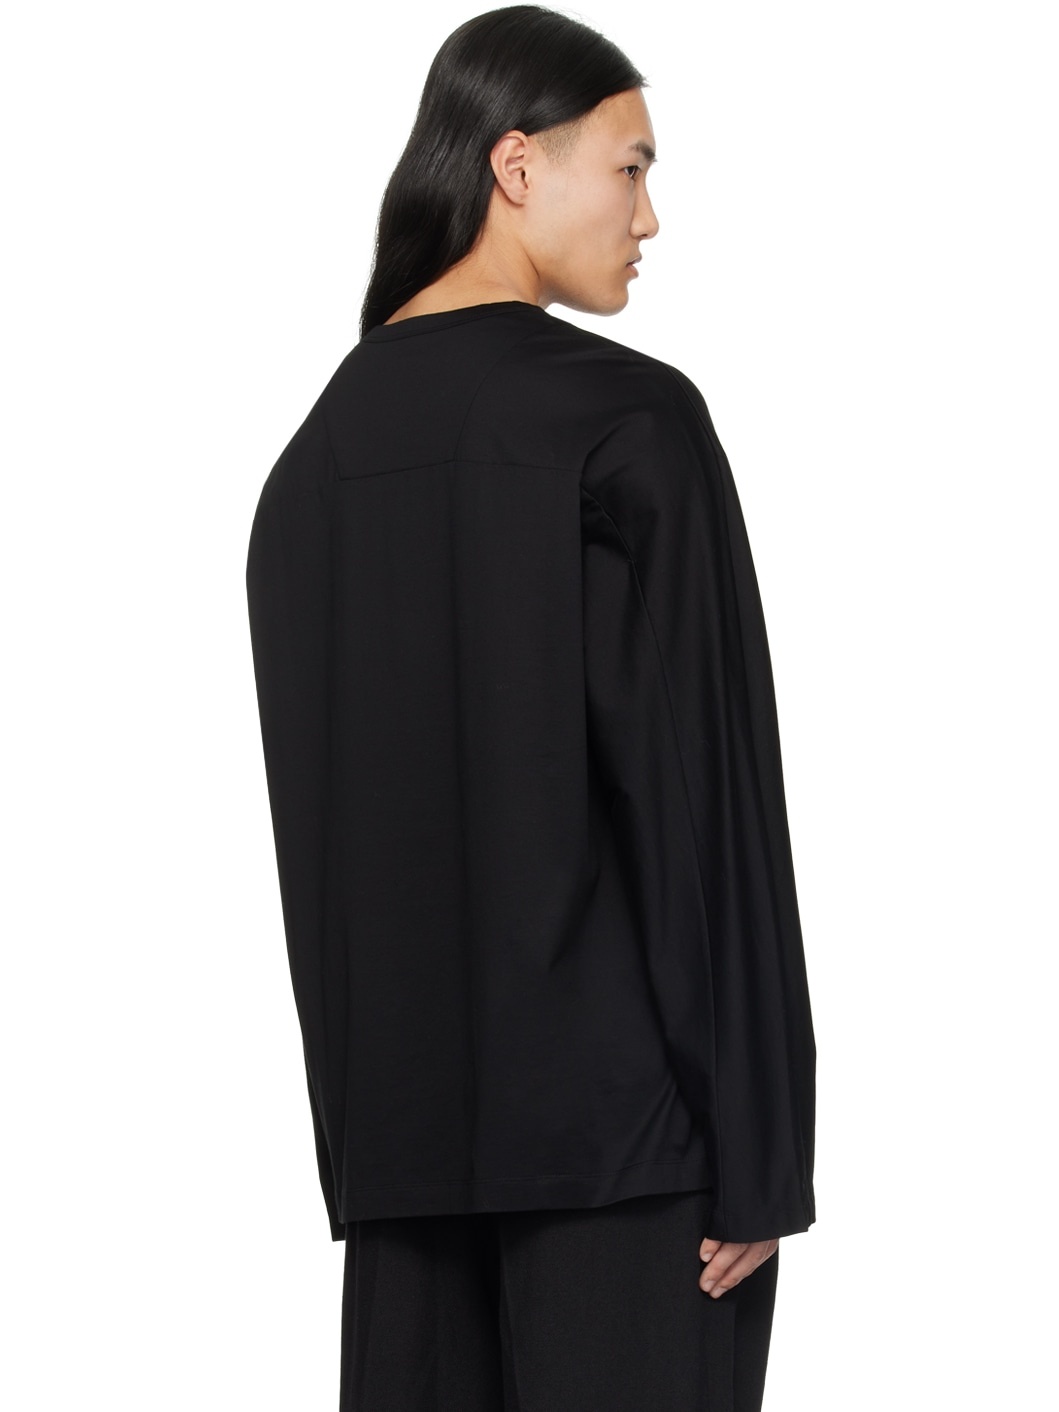 Black Embroidered Long Sleeve T-Shirt - 3